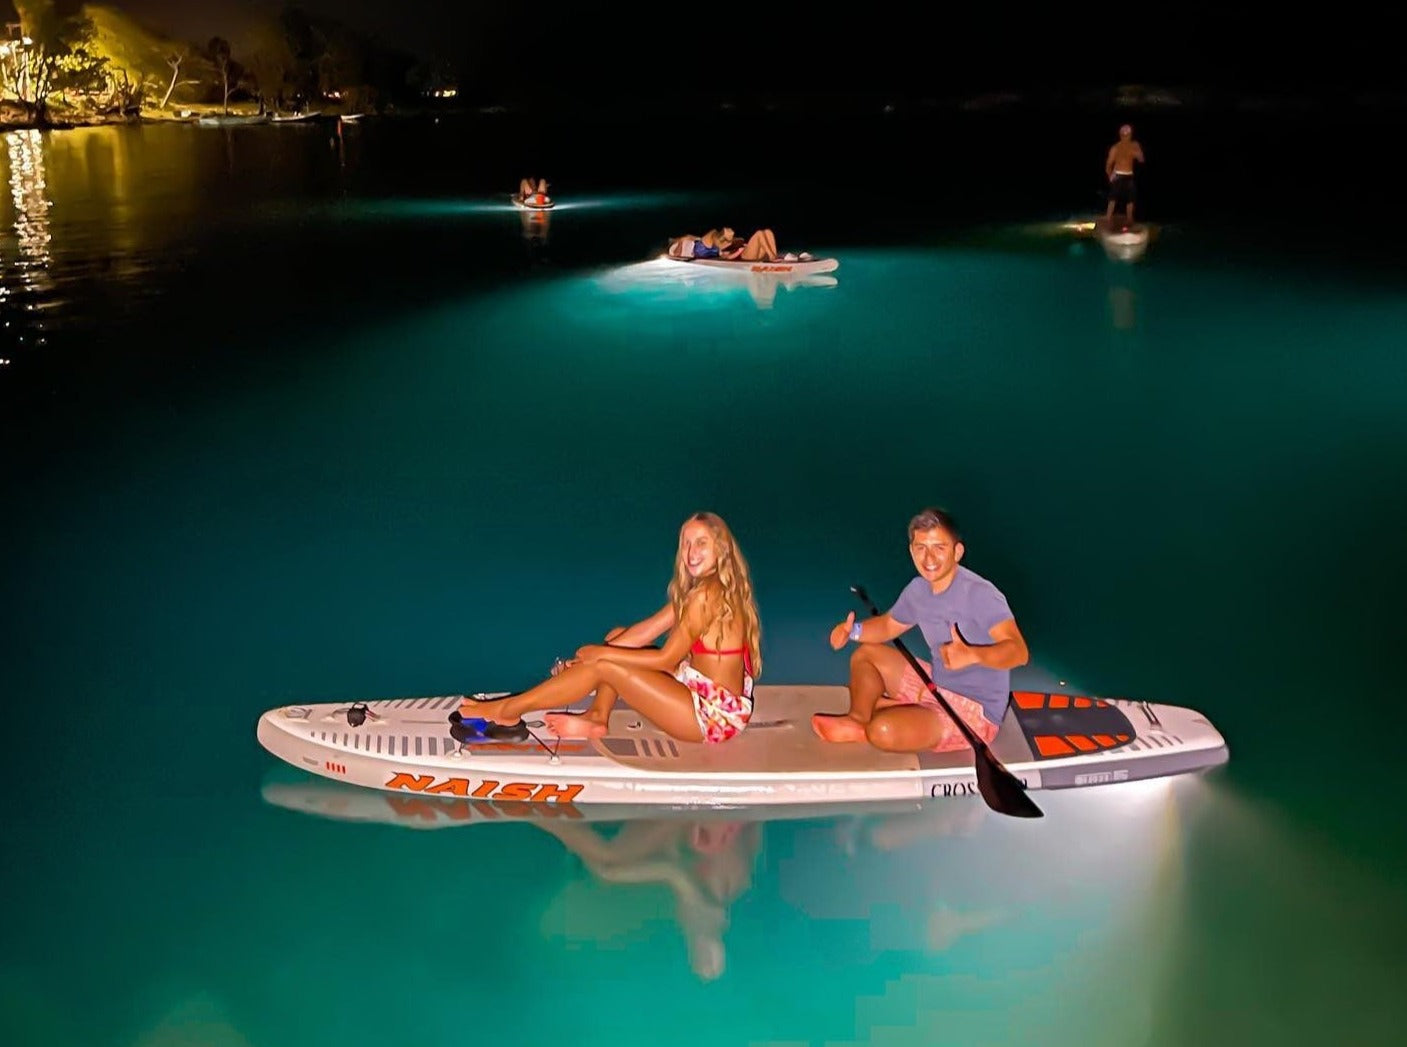 PADDLE BOARD NOCTURNO SAN ANDRES 